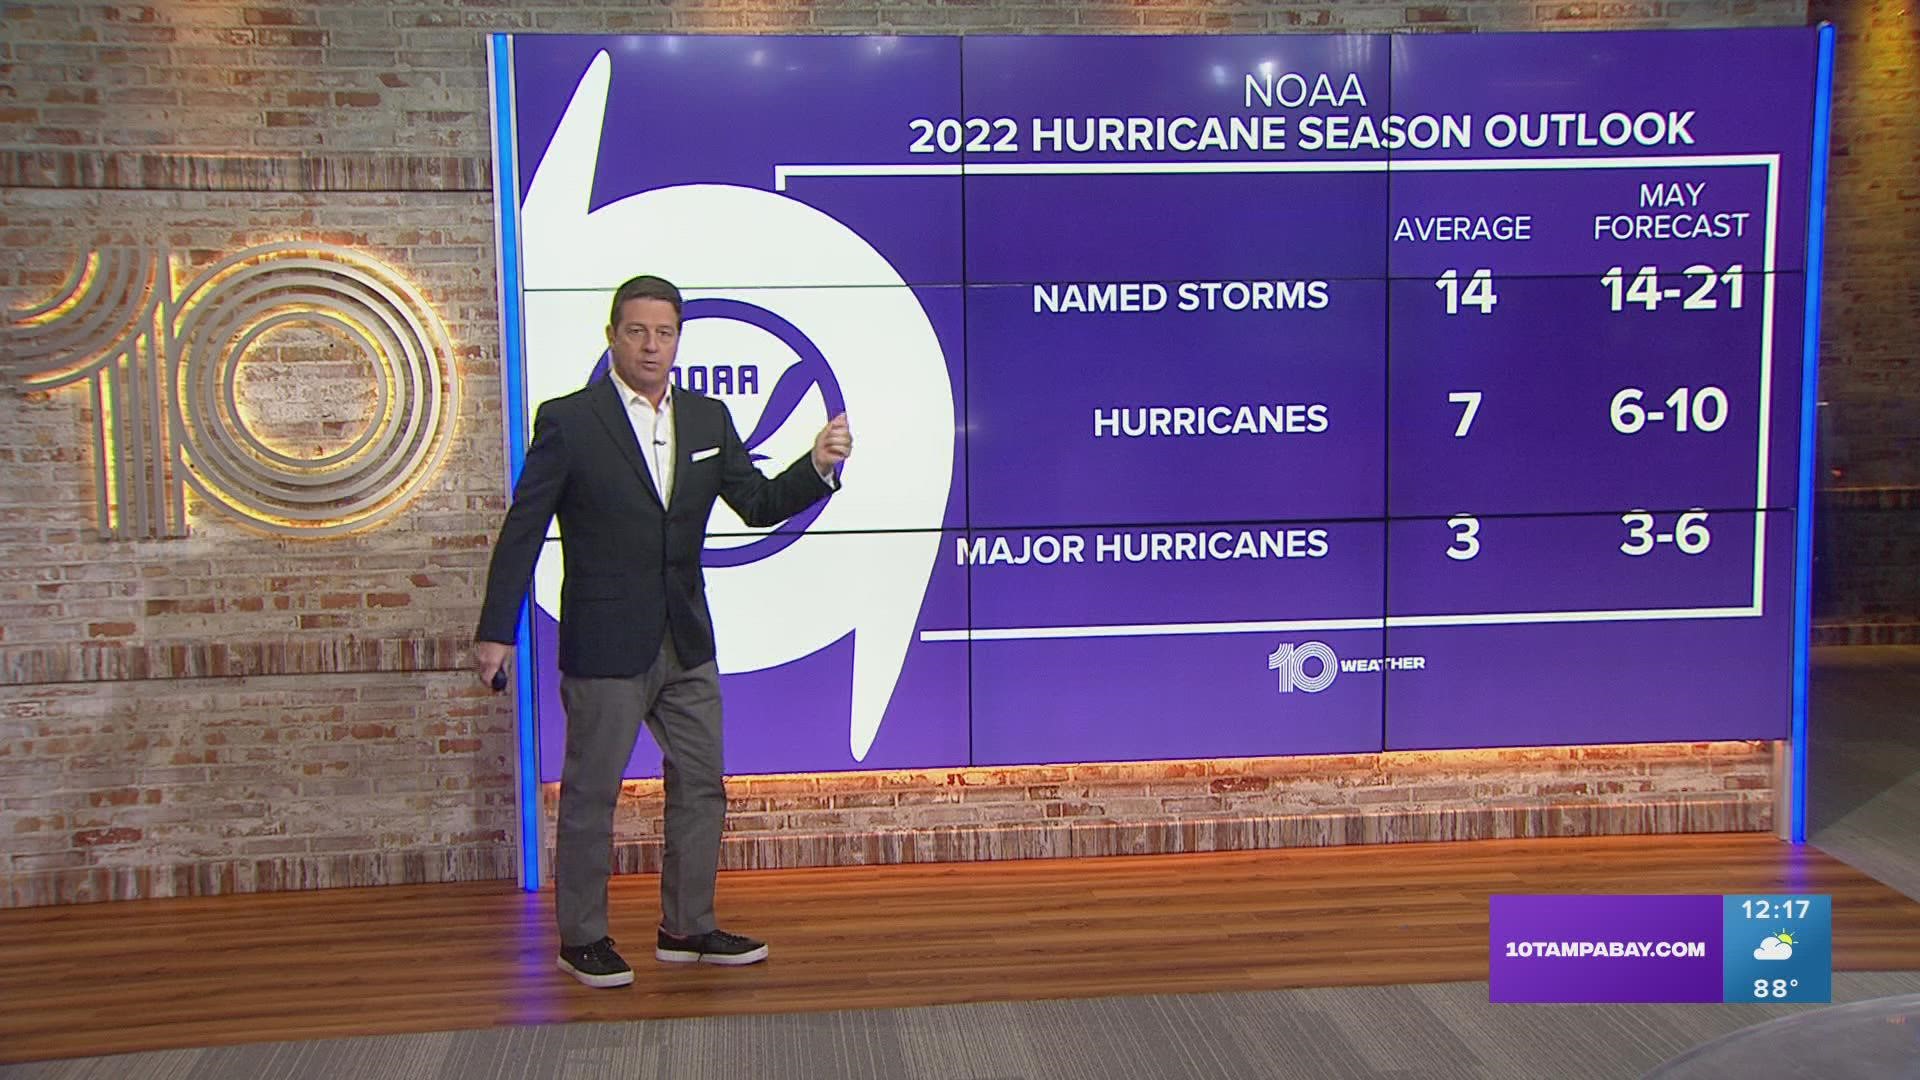 Of those, six to 10 storms are forecast to be of hurricane strength, and a handful reach major hurricane status.